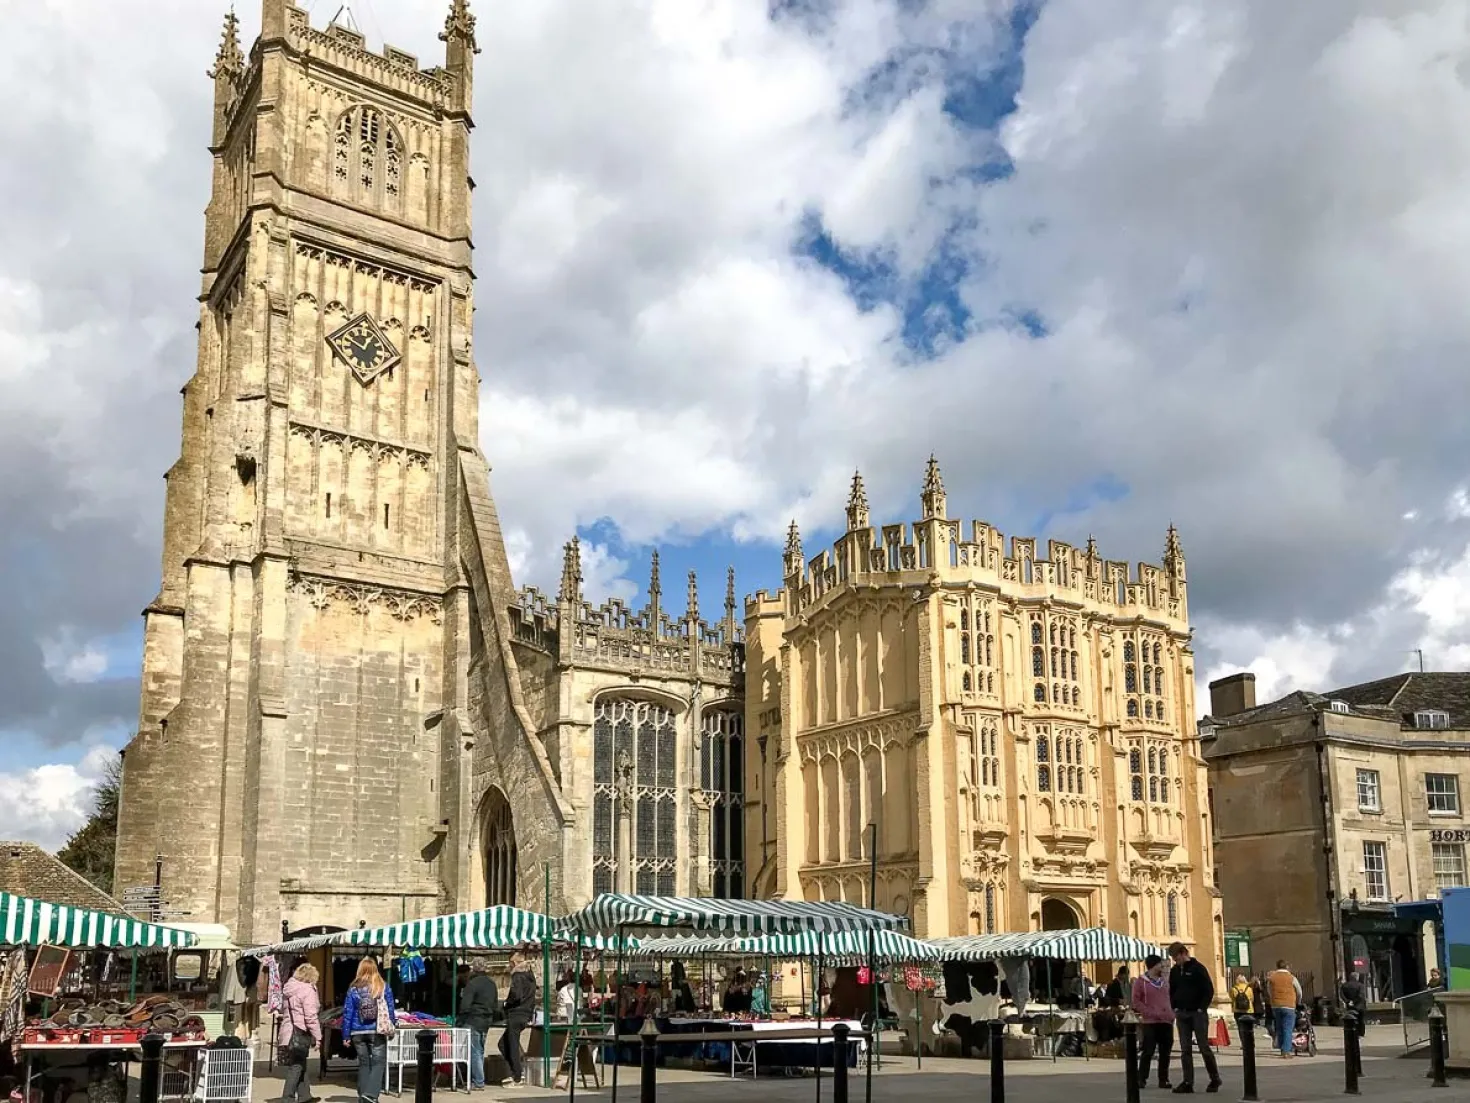 Places to Visit In Cirencester: A Guide image